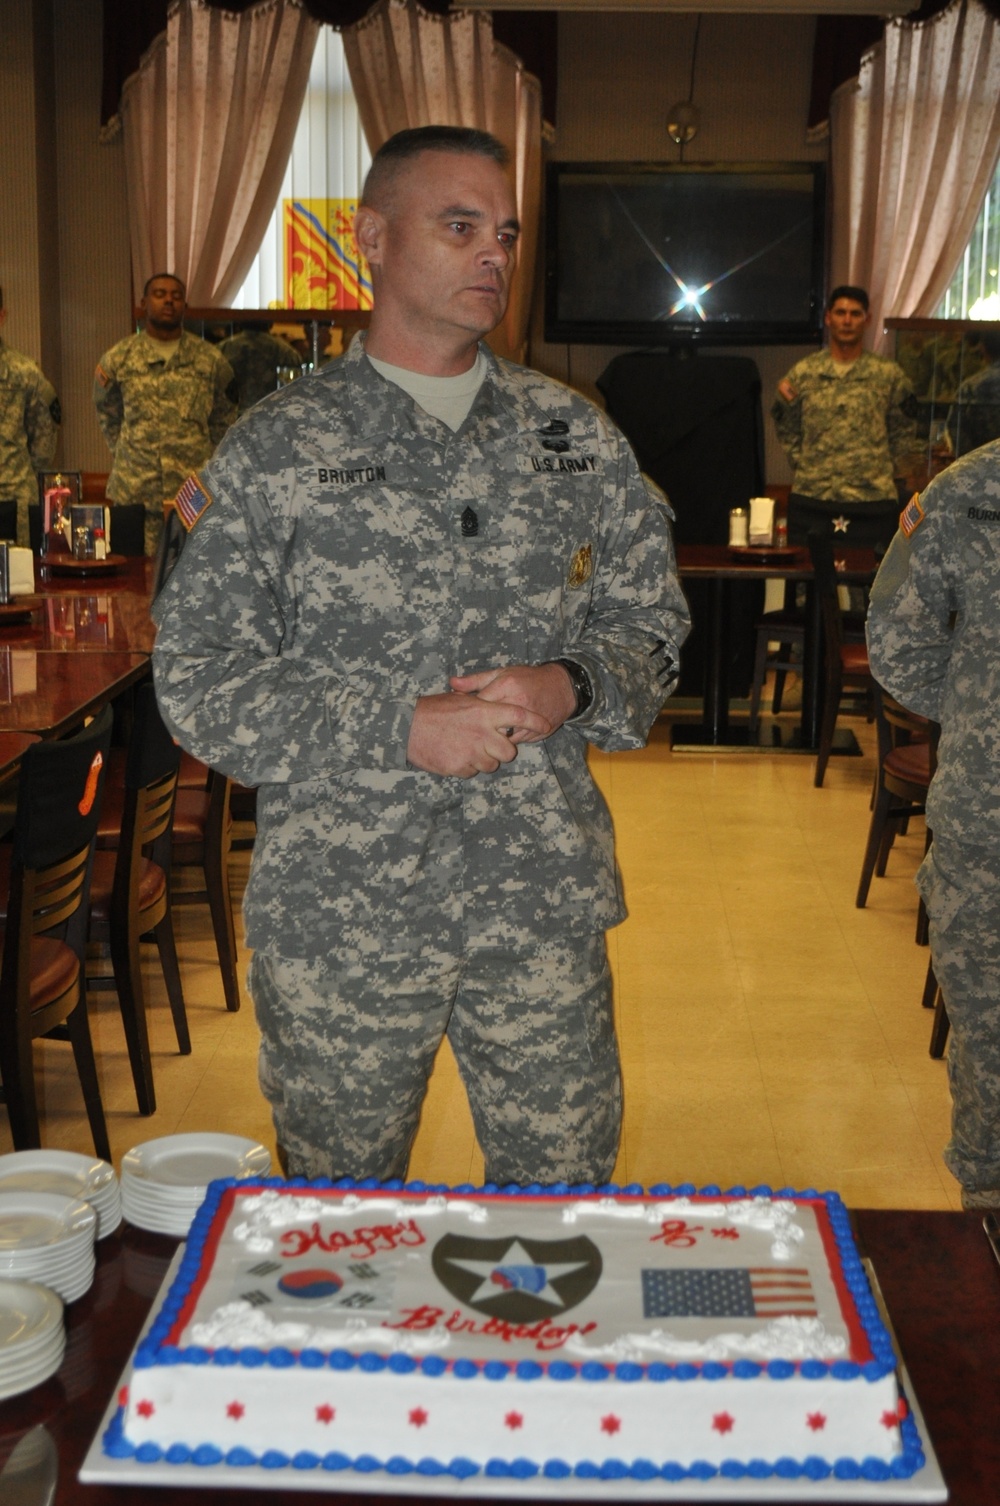 The 210th Fires Brigade celebrates 2nd Infantry Division’s 96th birthday